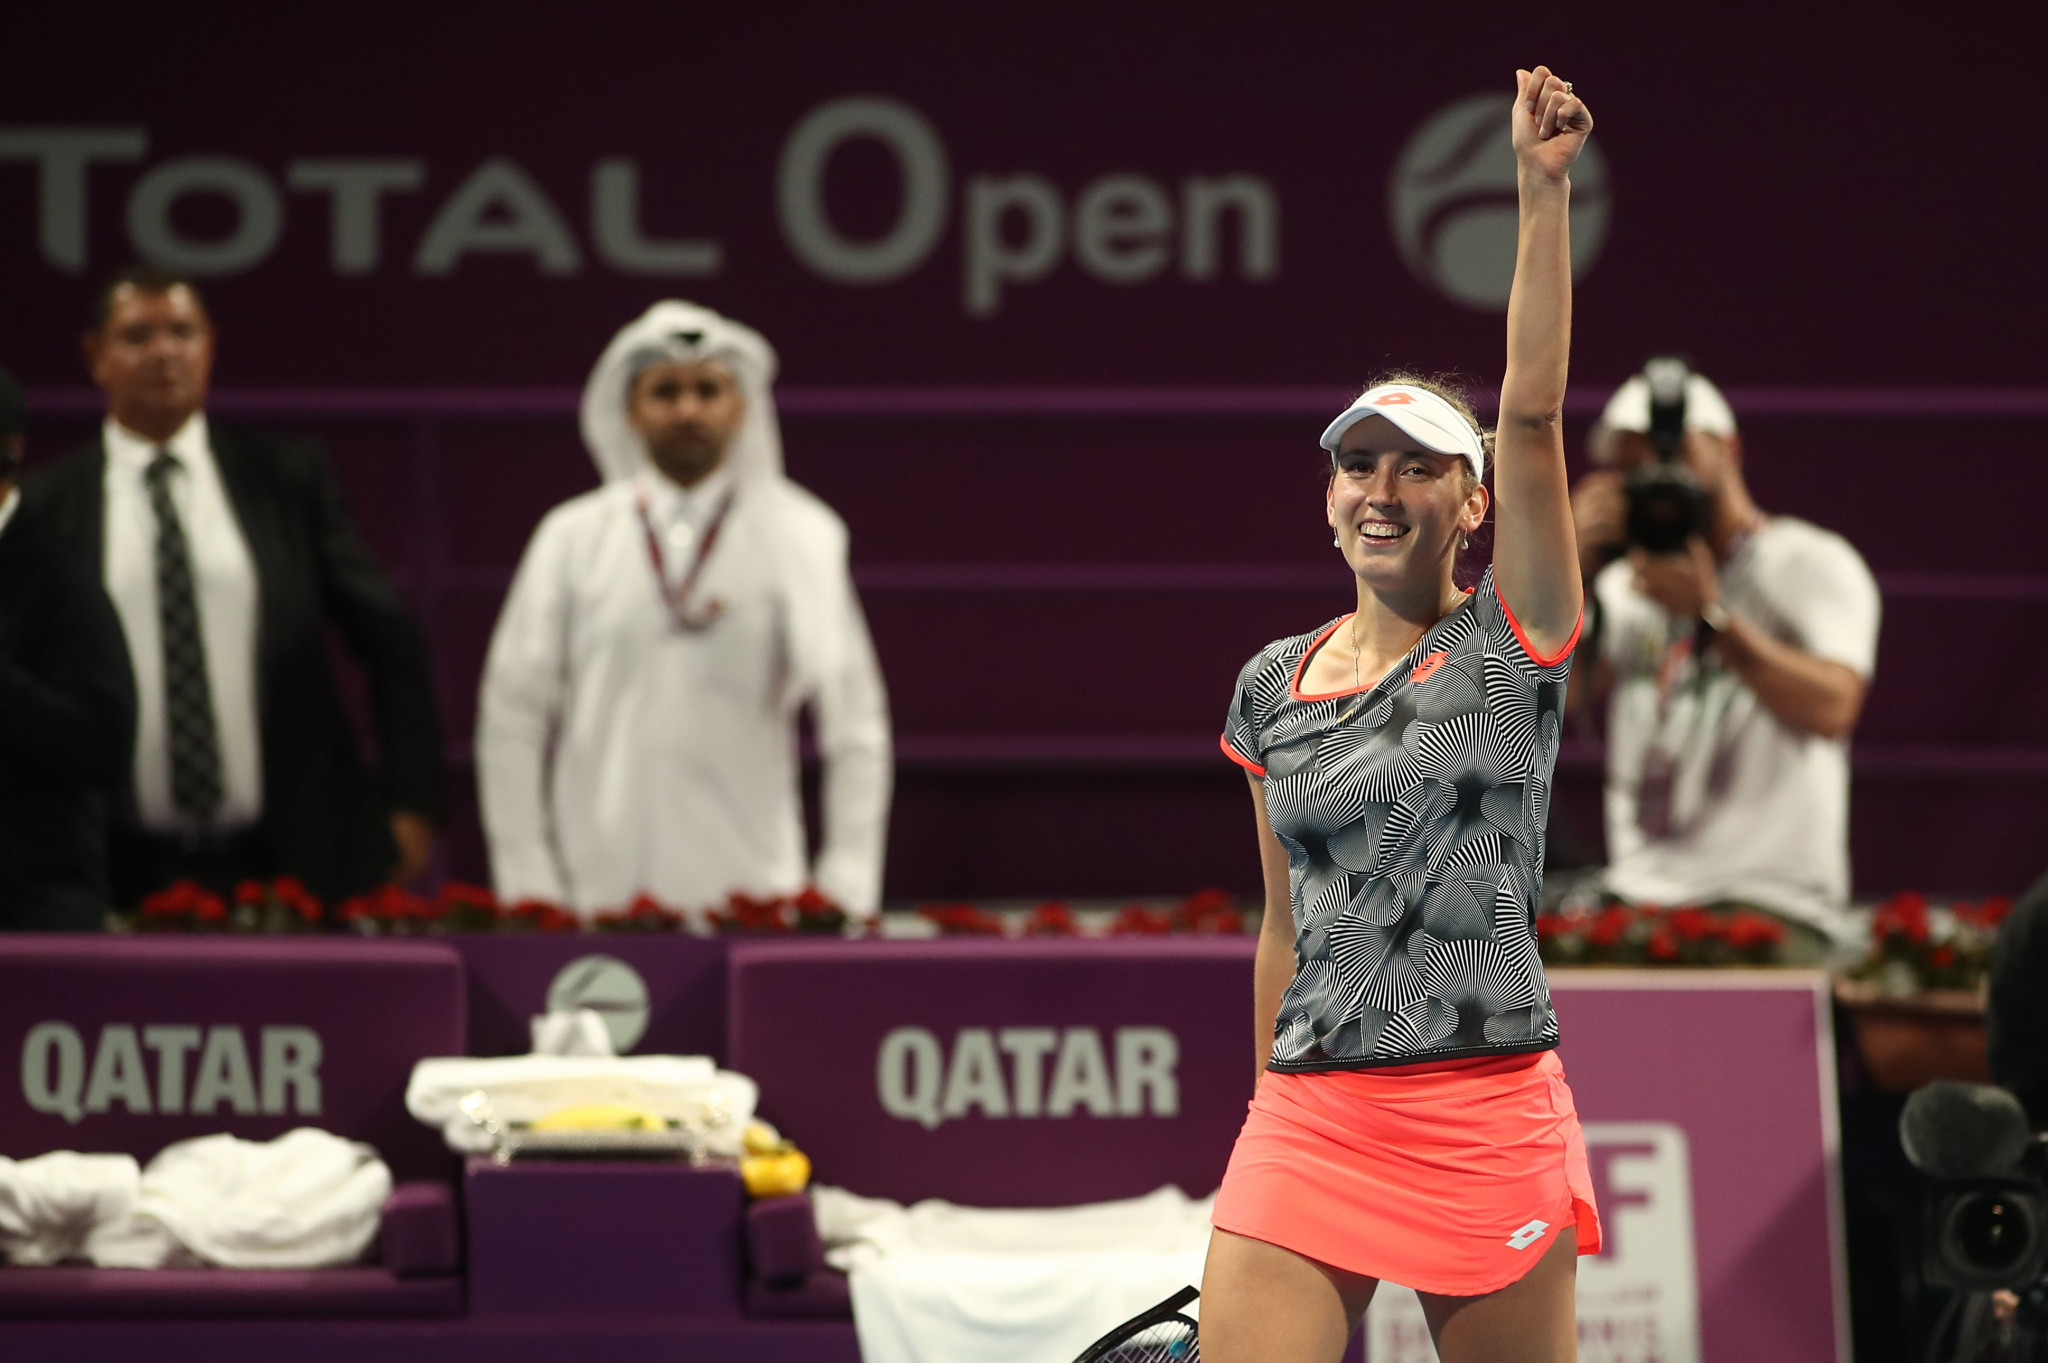 Mertens fights back to defeat top seed Halep in final of WTA Qatar Open